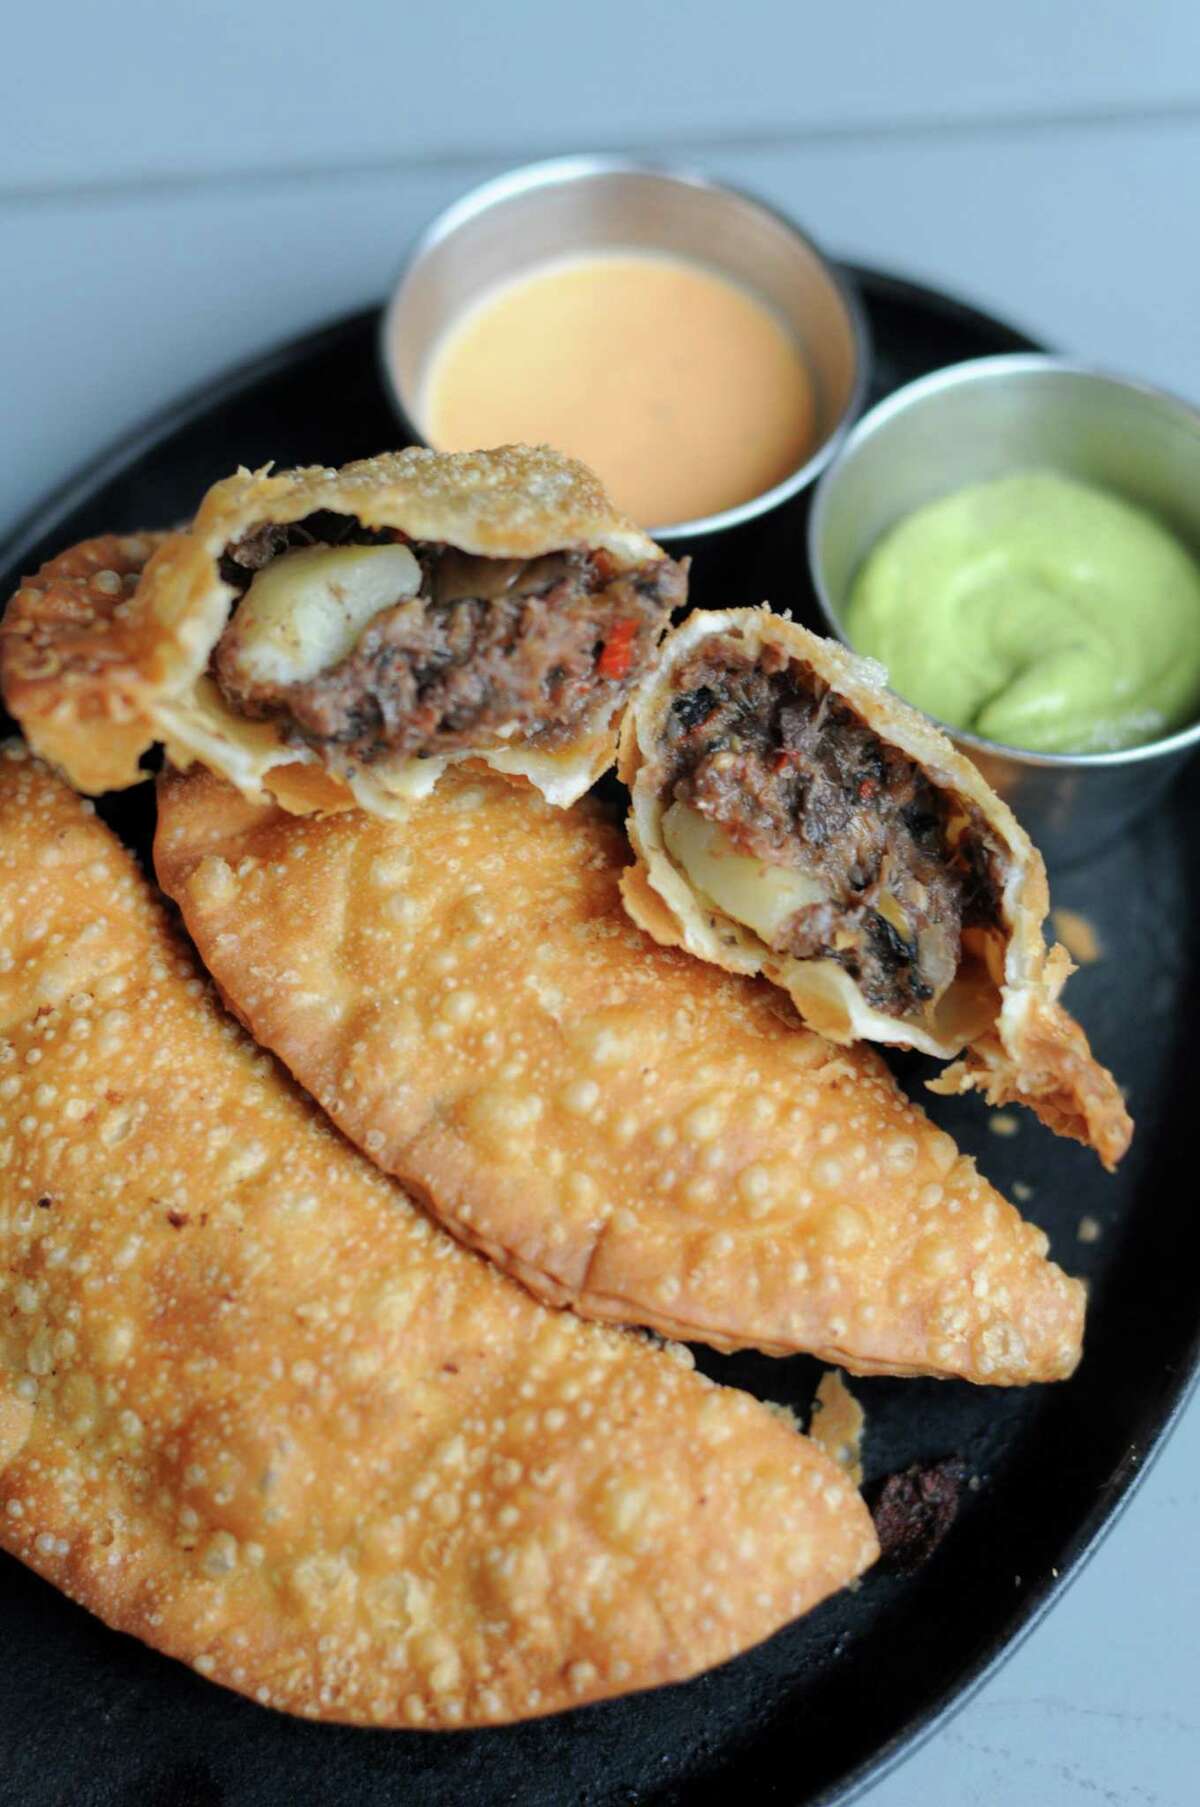 The barbacoa empanadas at Botika are stuffed with braised beef cheeks, olives, roasted peppers and potato.